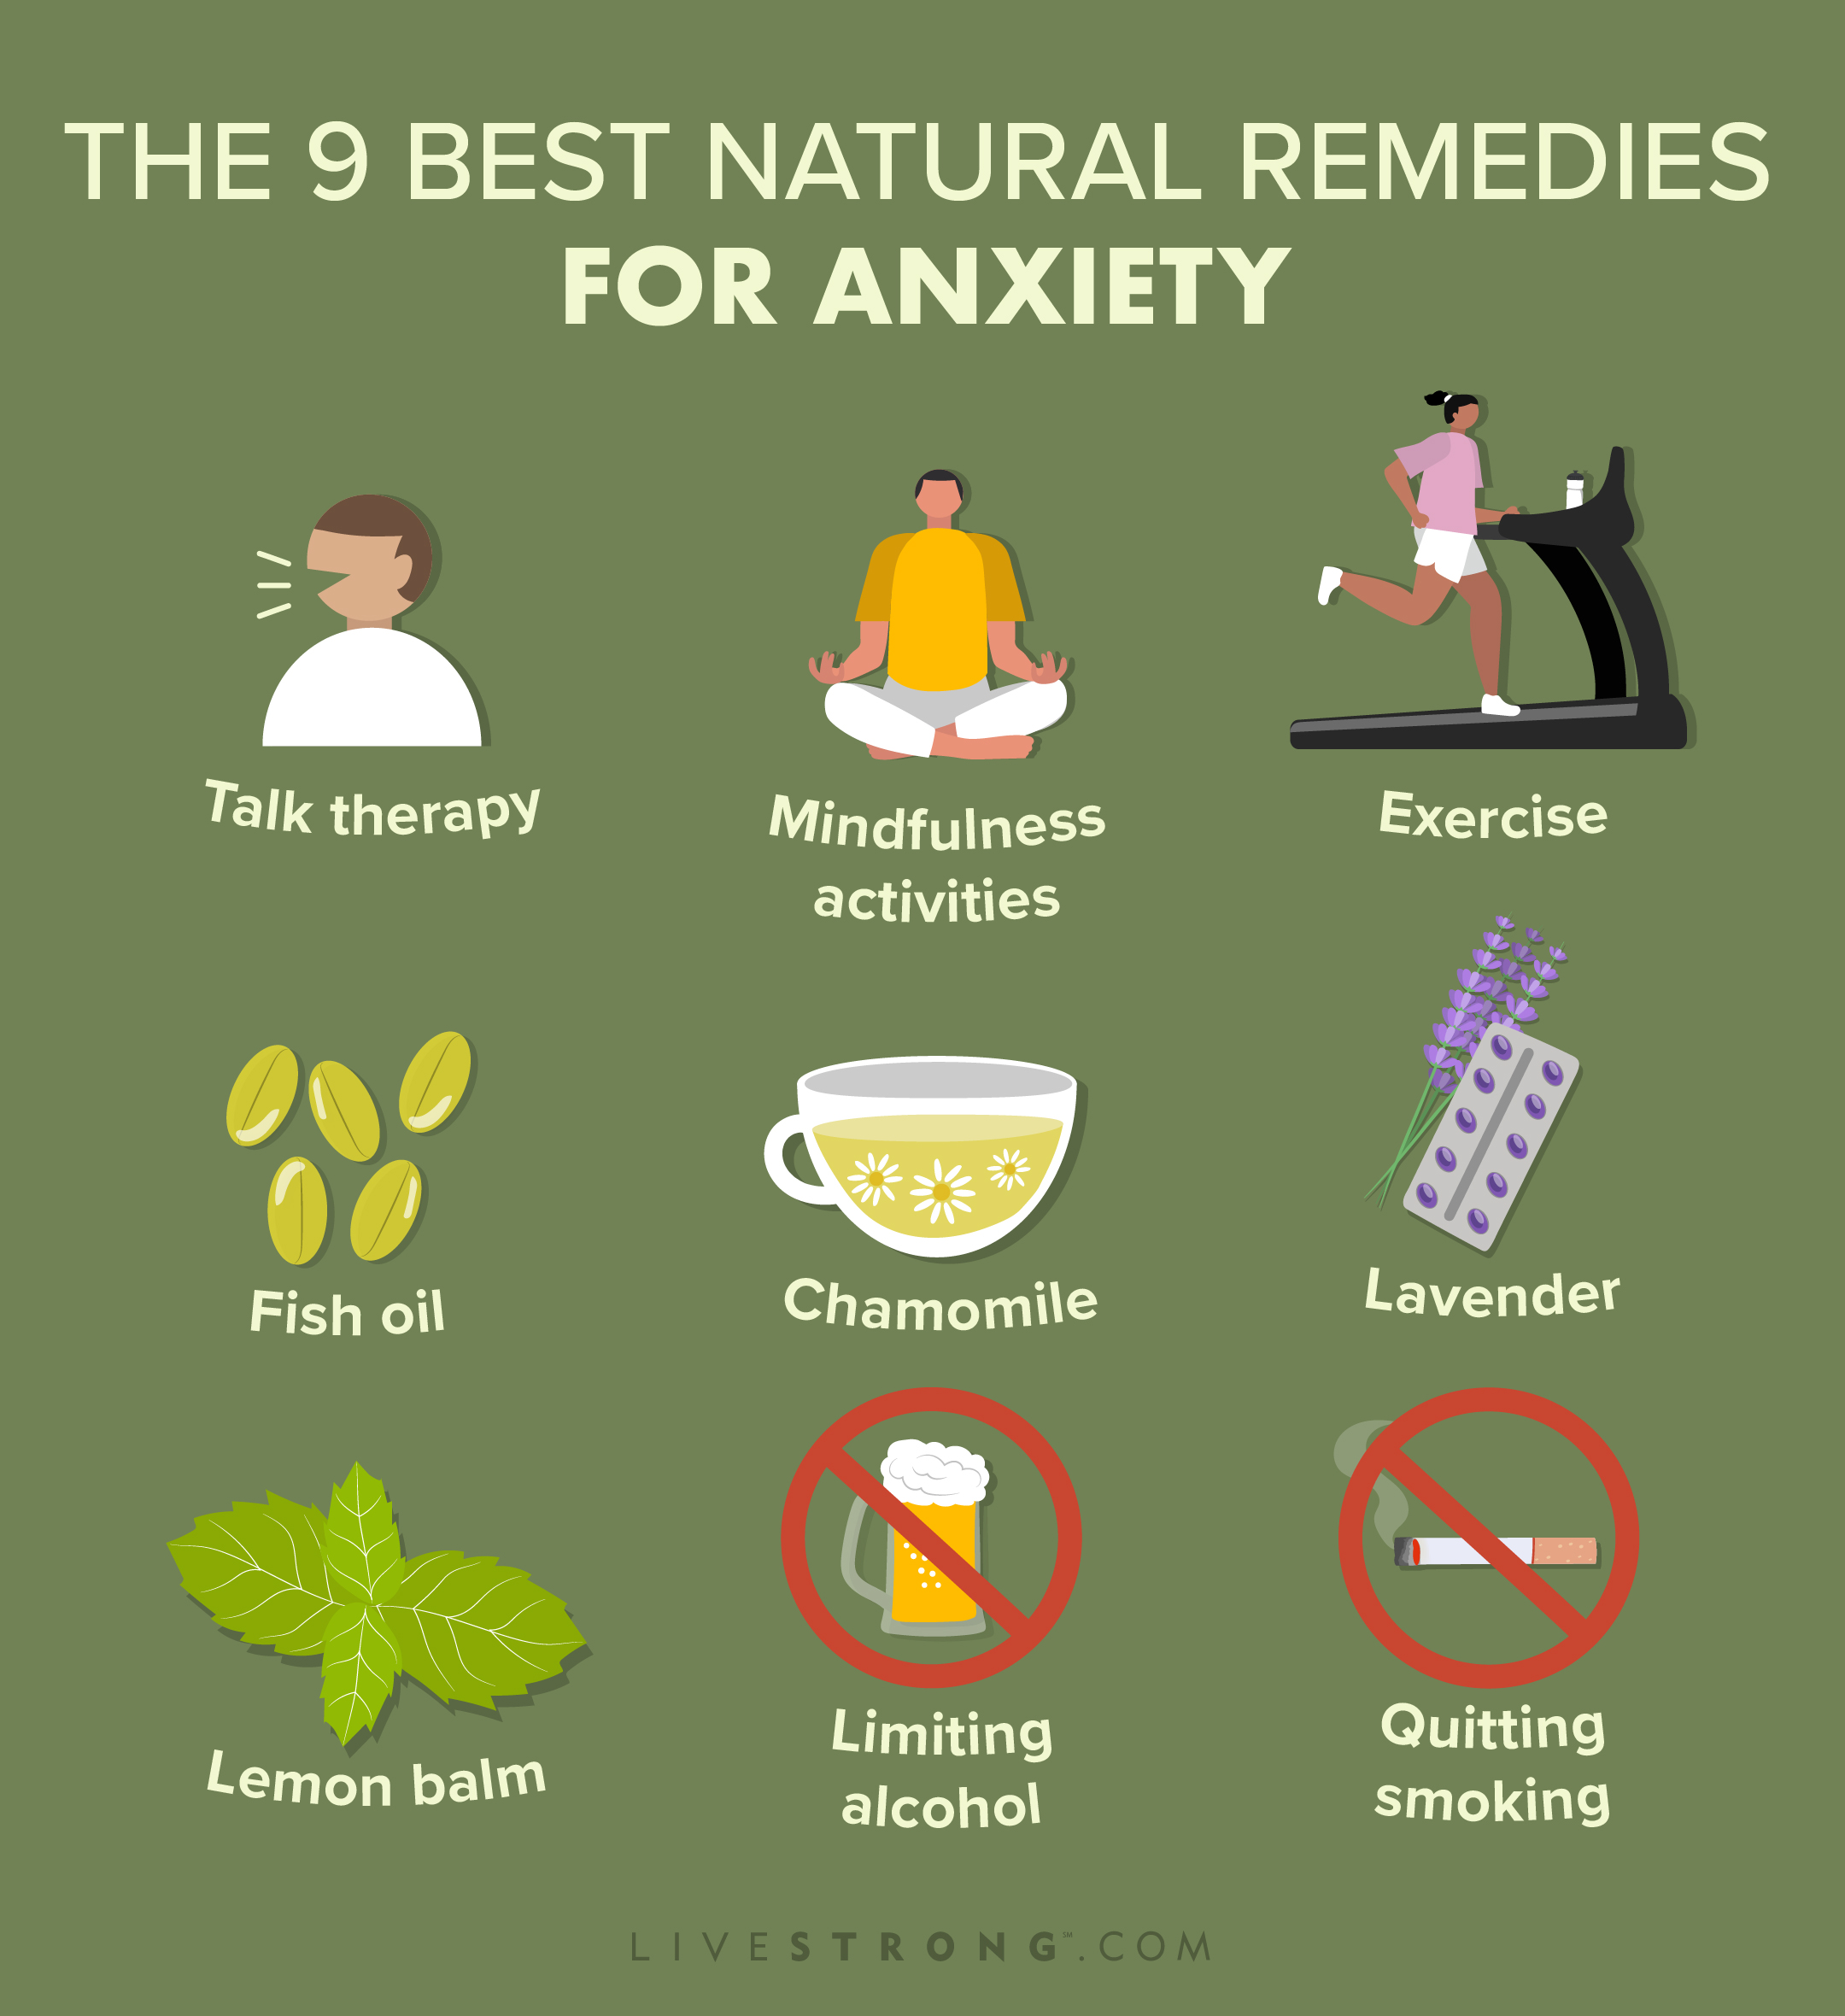 Natural remedies for anxiety